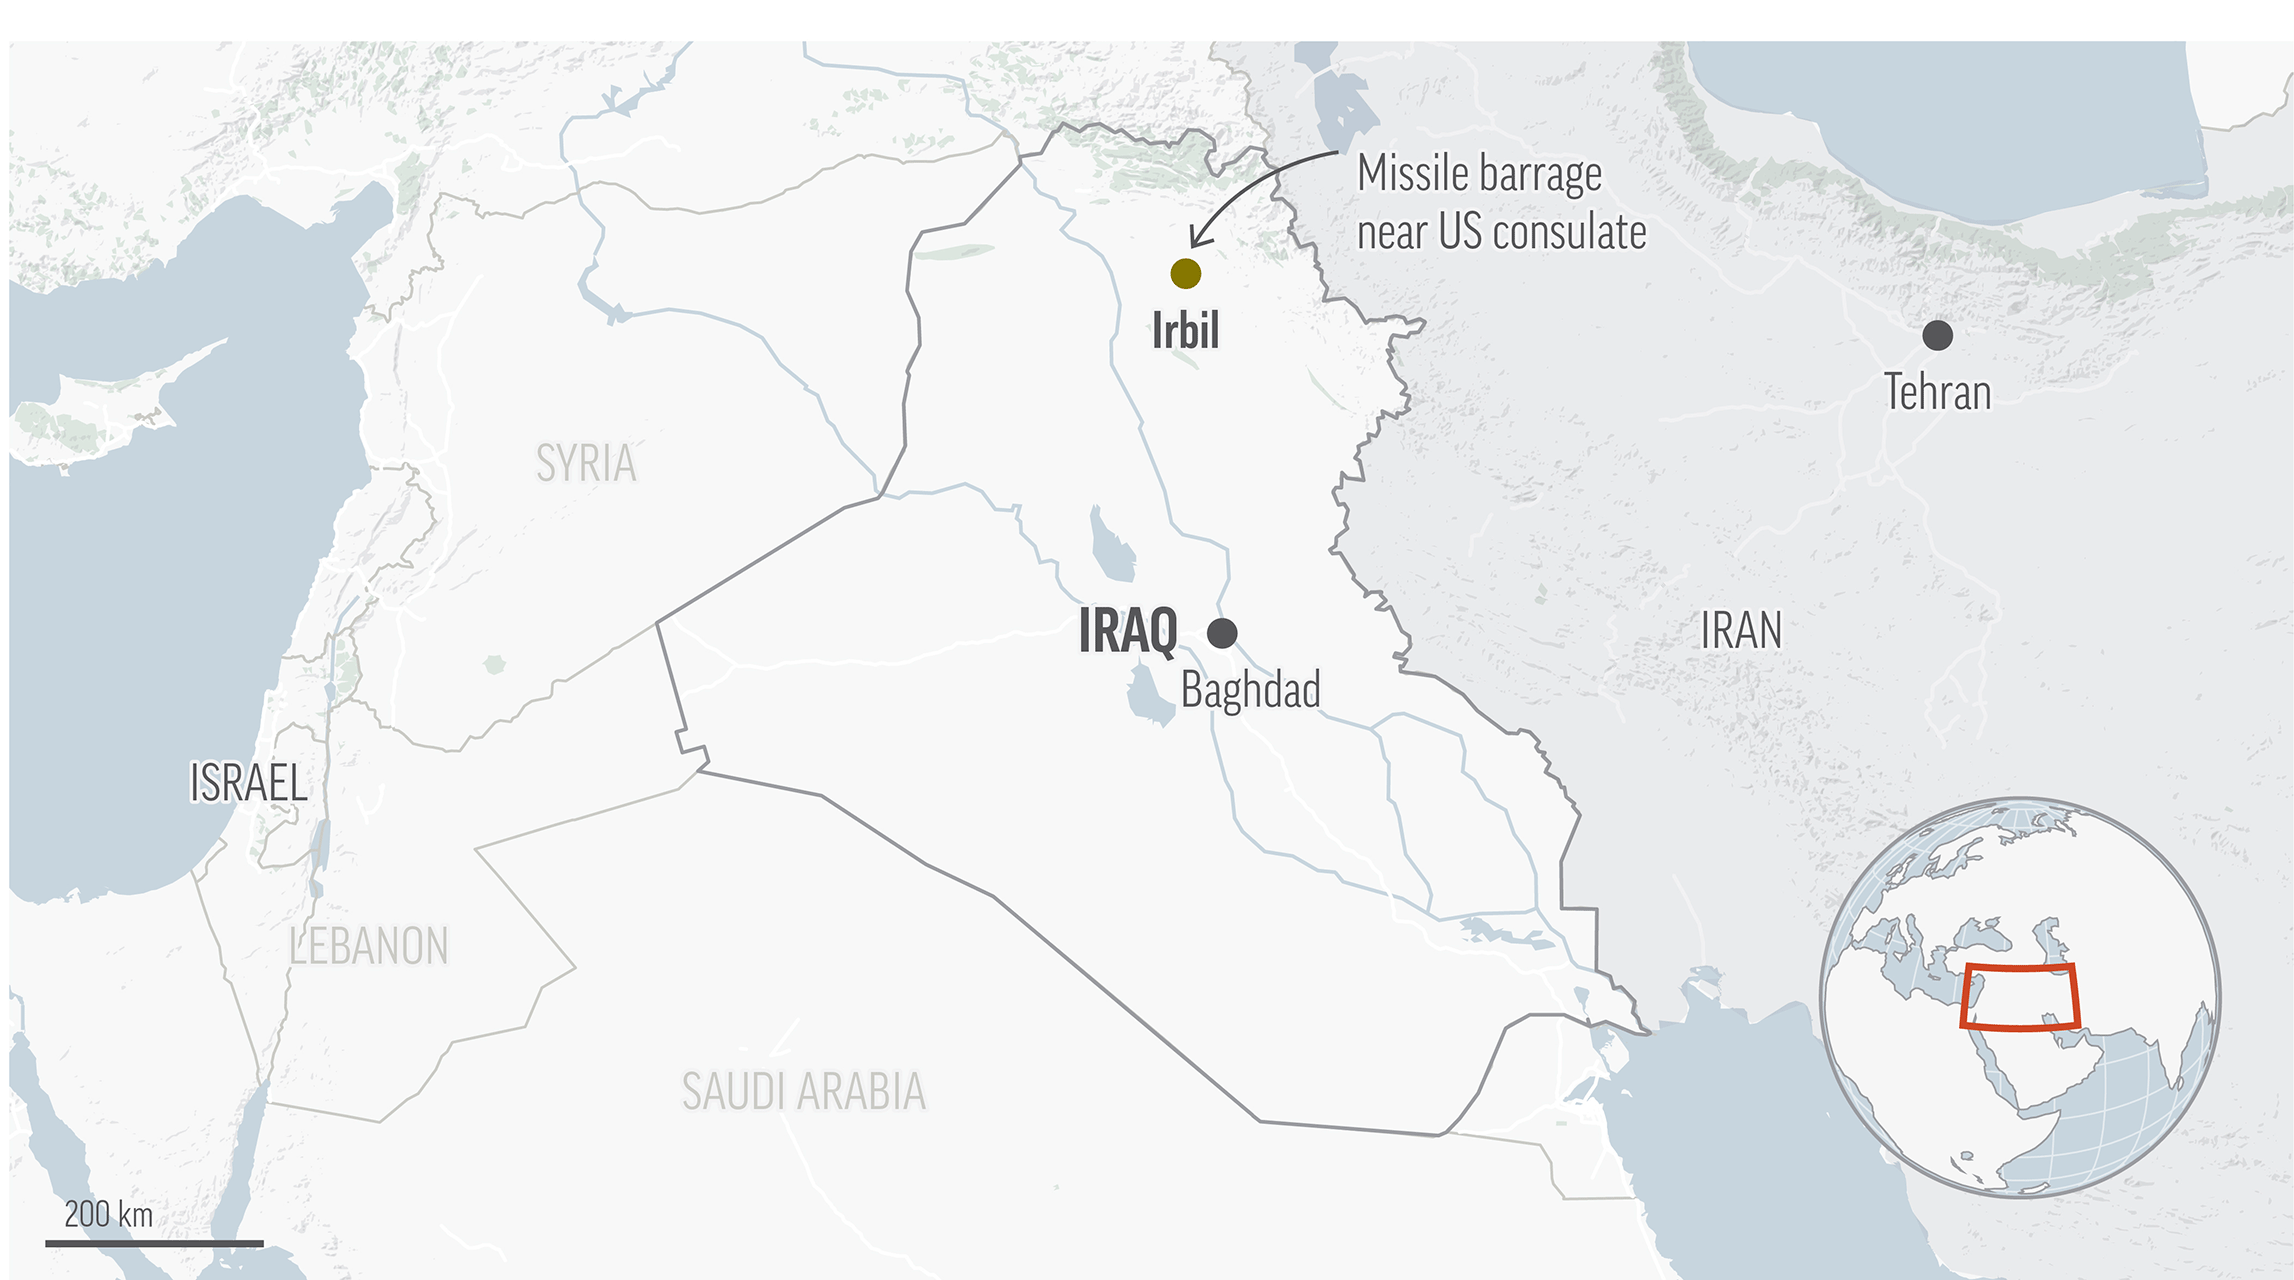 Iran has claimed responsibility for a missile barrage that struck near a sprawling U.S. consulate complex in the northern Iraqi city of Irbil, saying it was retaliation for an Israeli strike in Syria that killed two members of its Revolutionary Guard.